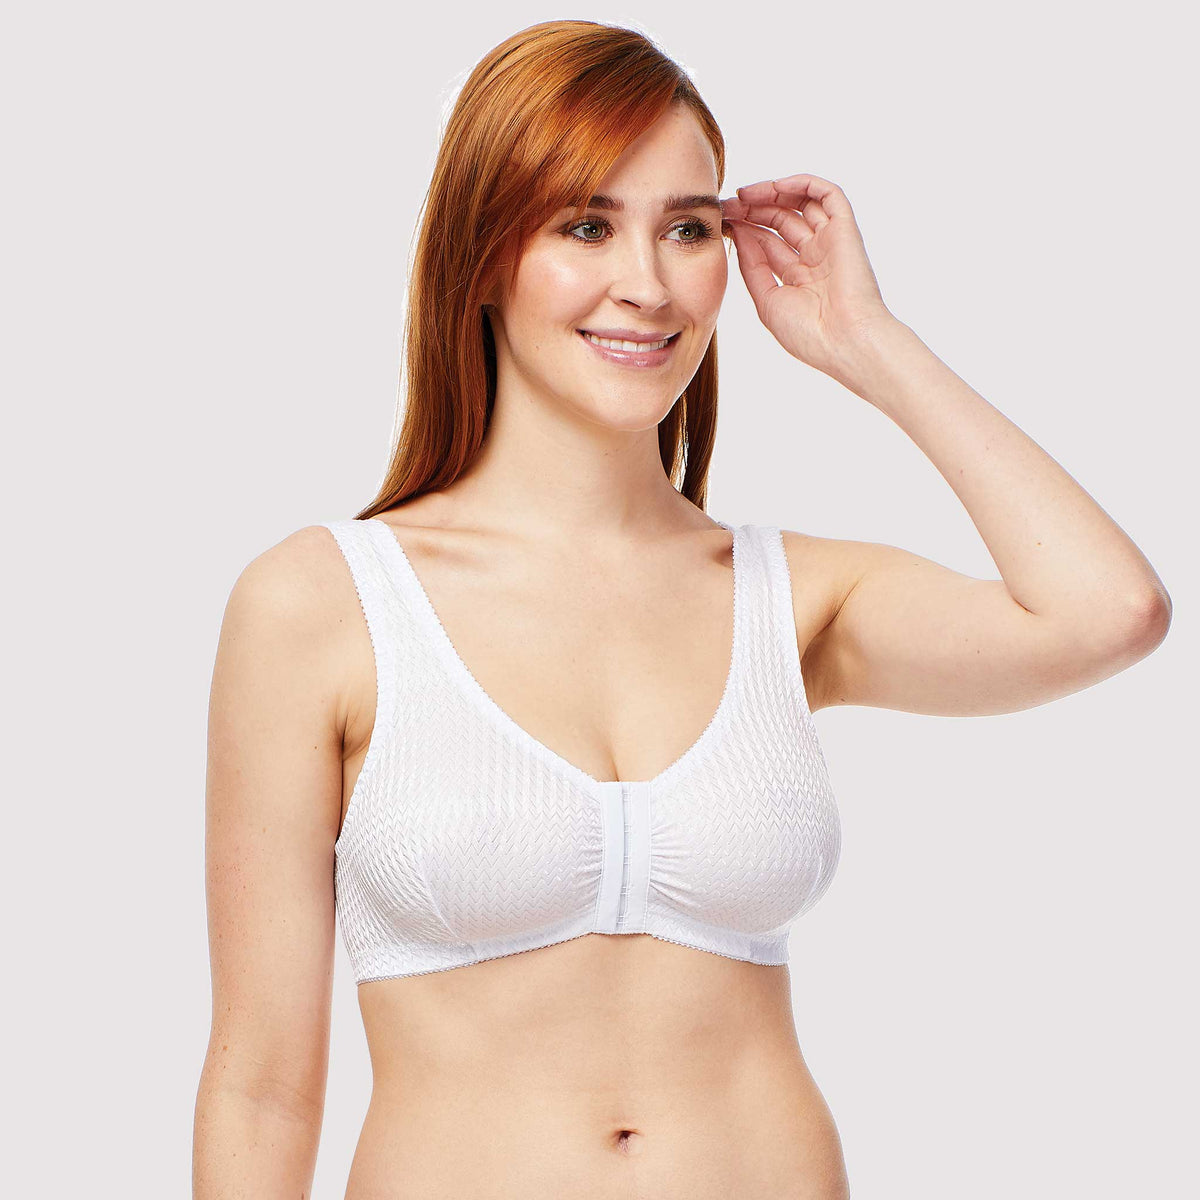 Style # BES04 : Compression Bra Class I – The Compressure Comfort